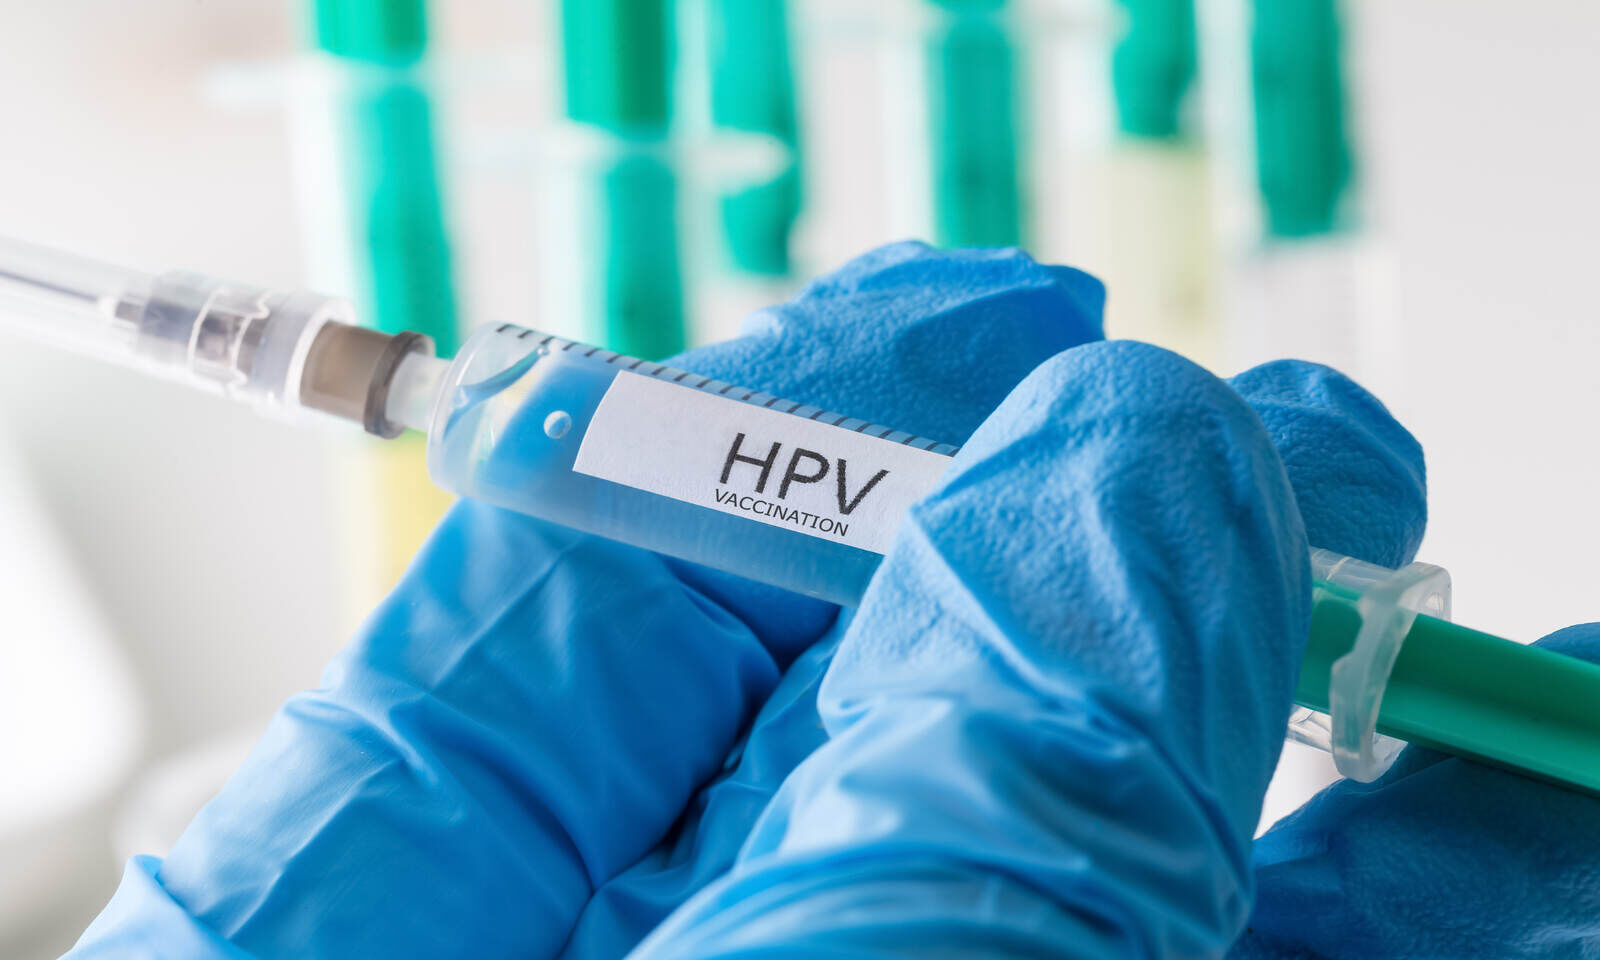 HPV vaccination - What do you need to know about HPV vaccination?-uncategorized-vaccination, HPV vaccination